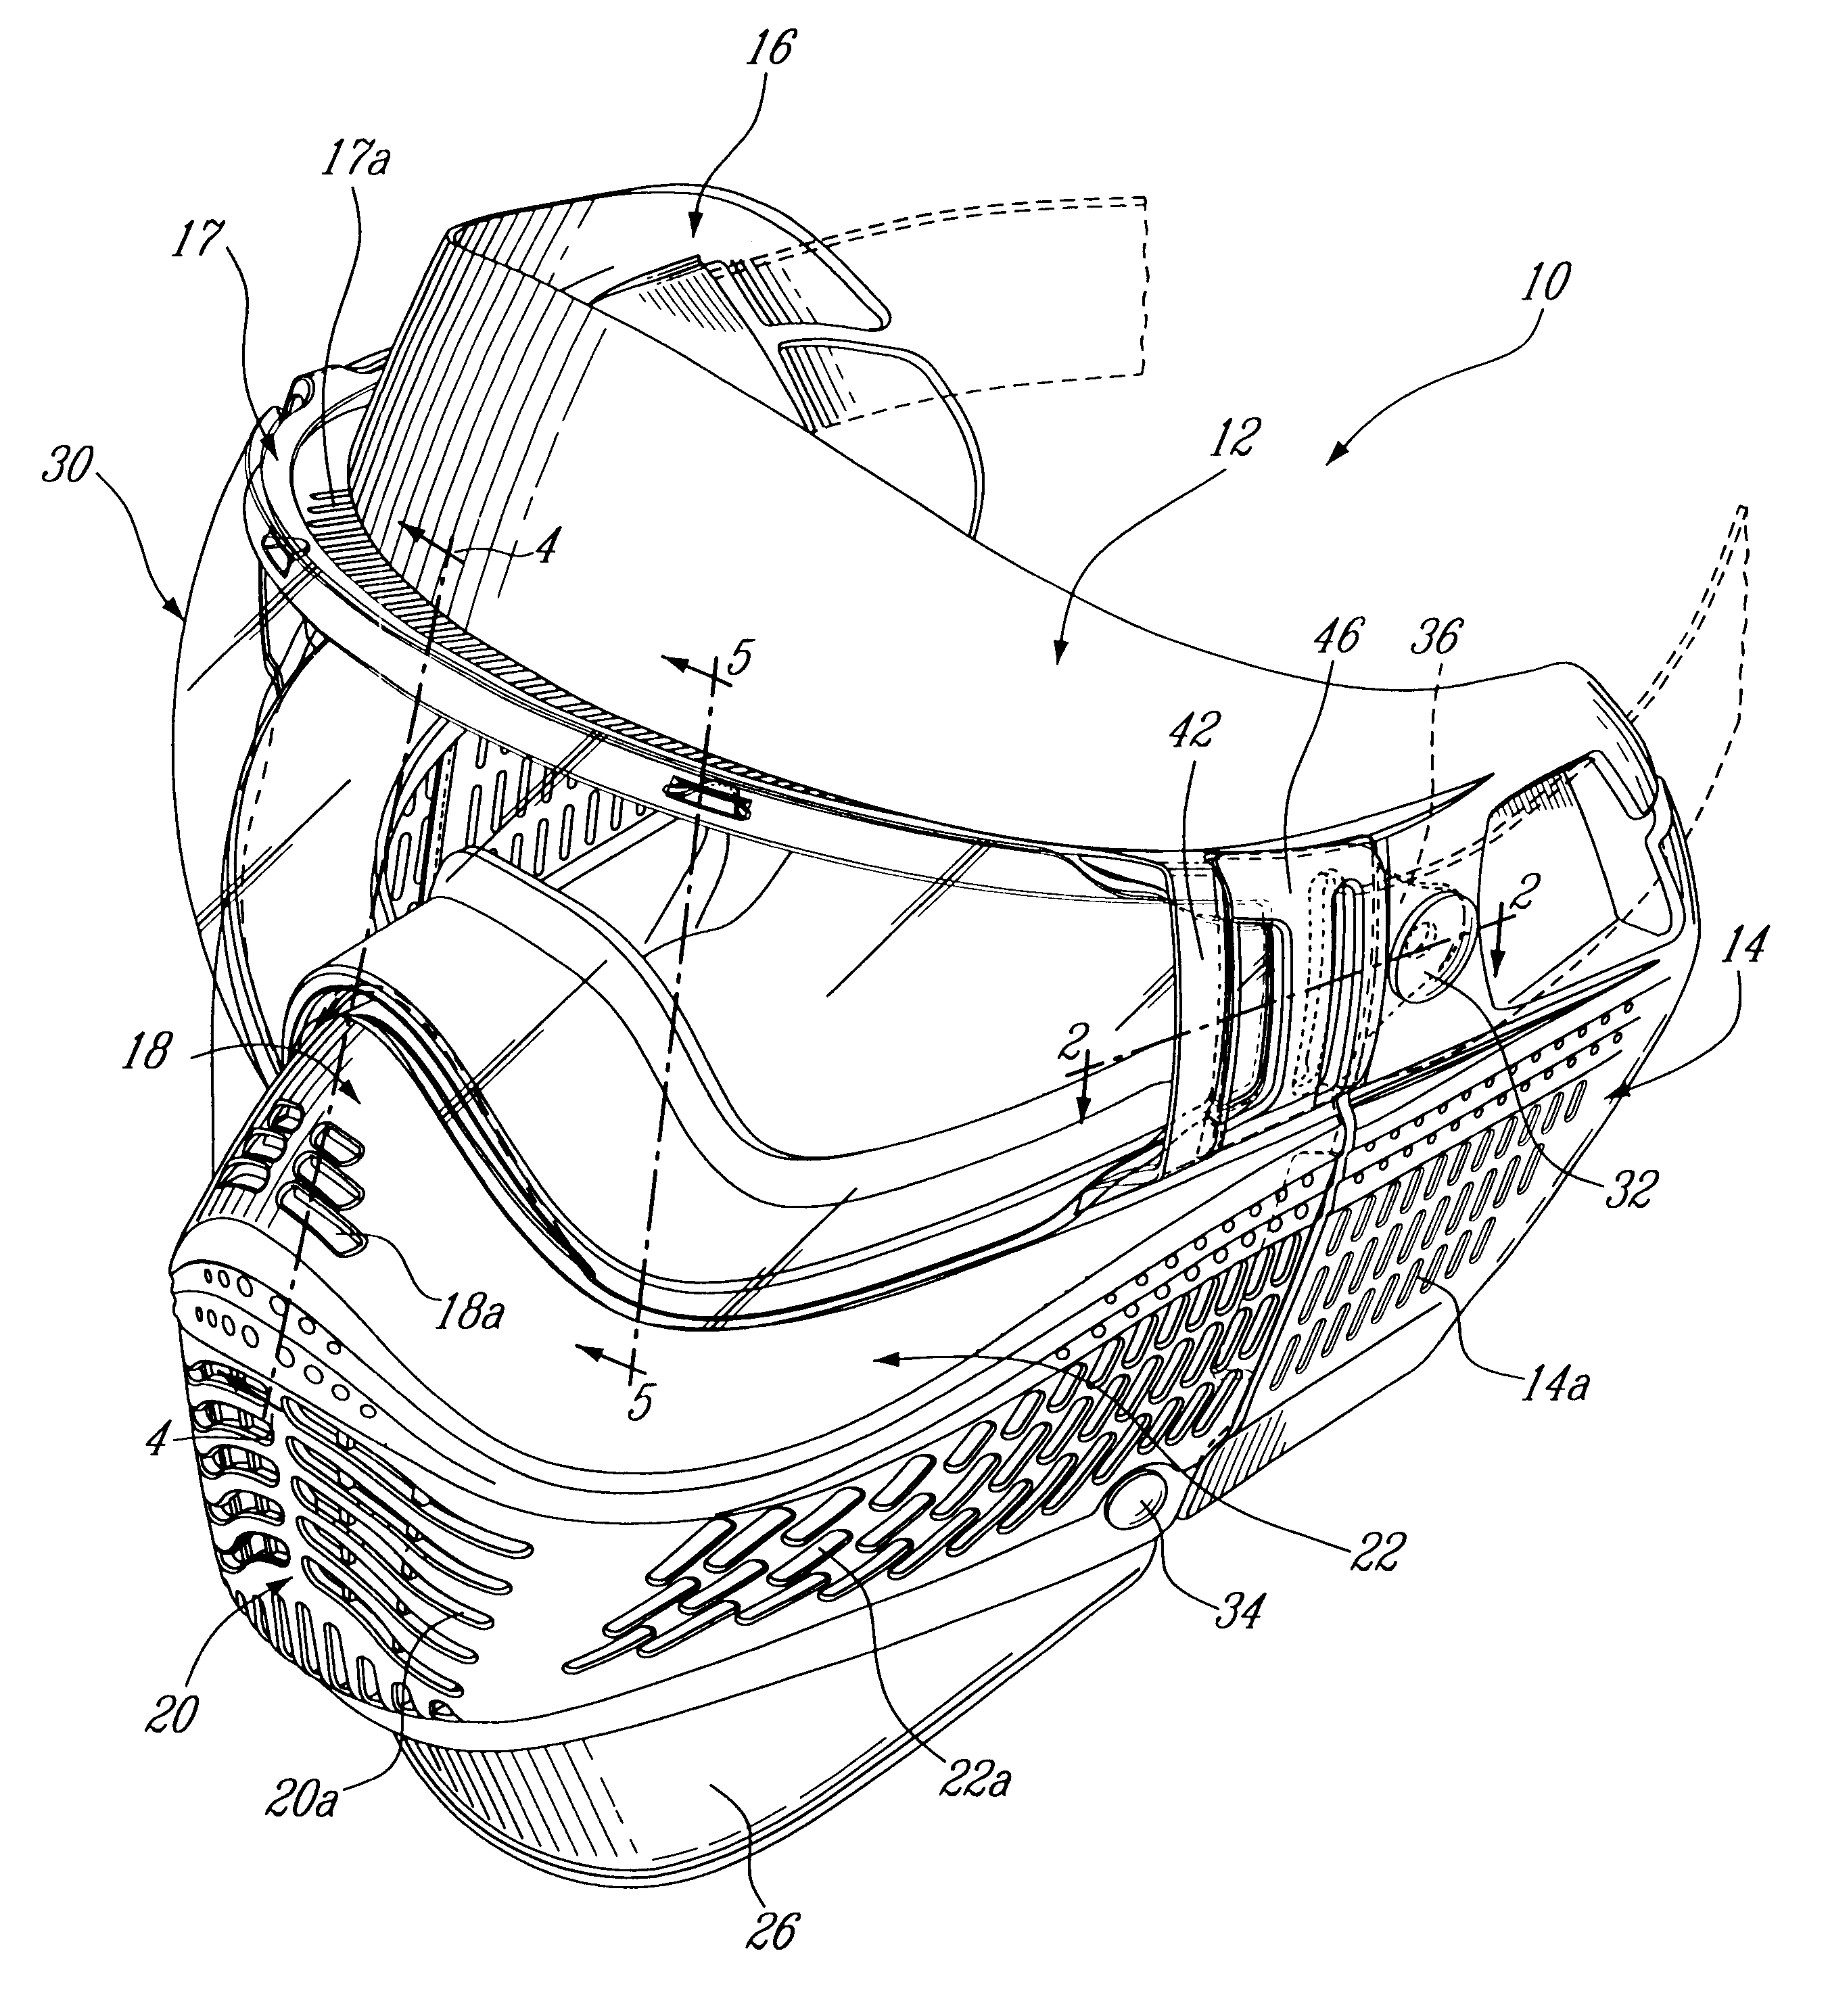 Protective mask with anchor clamp for physical games